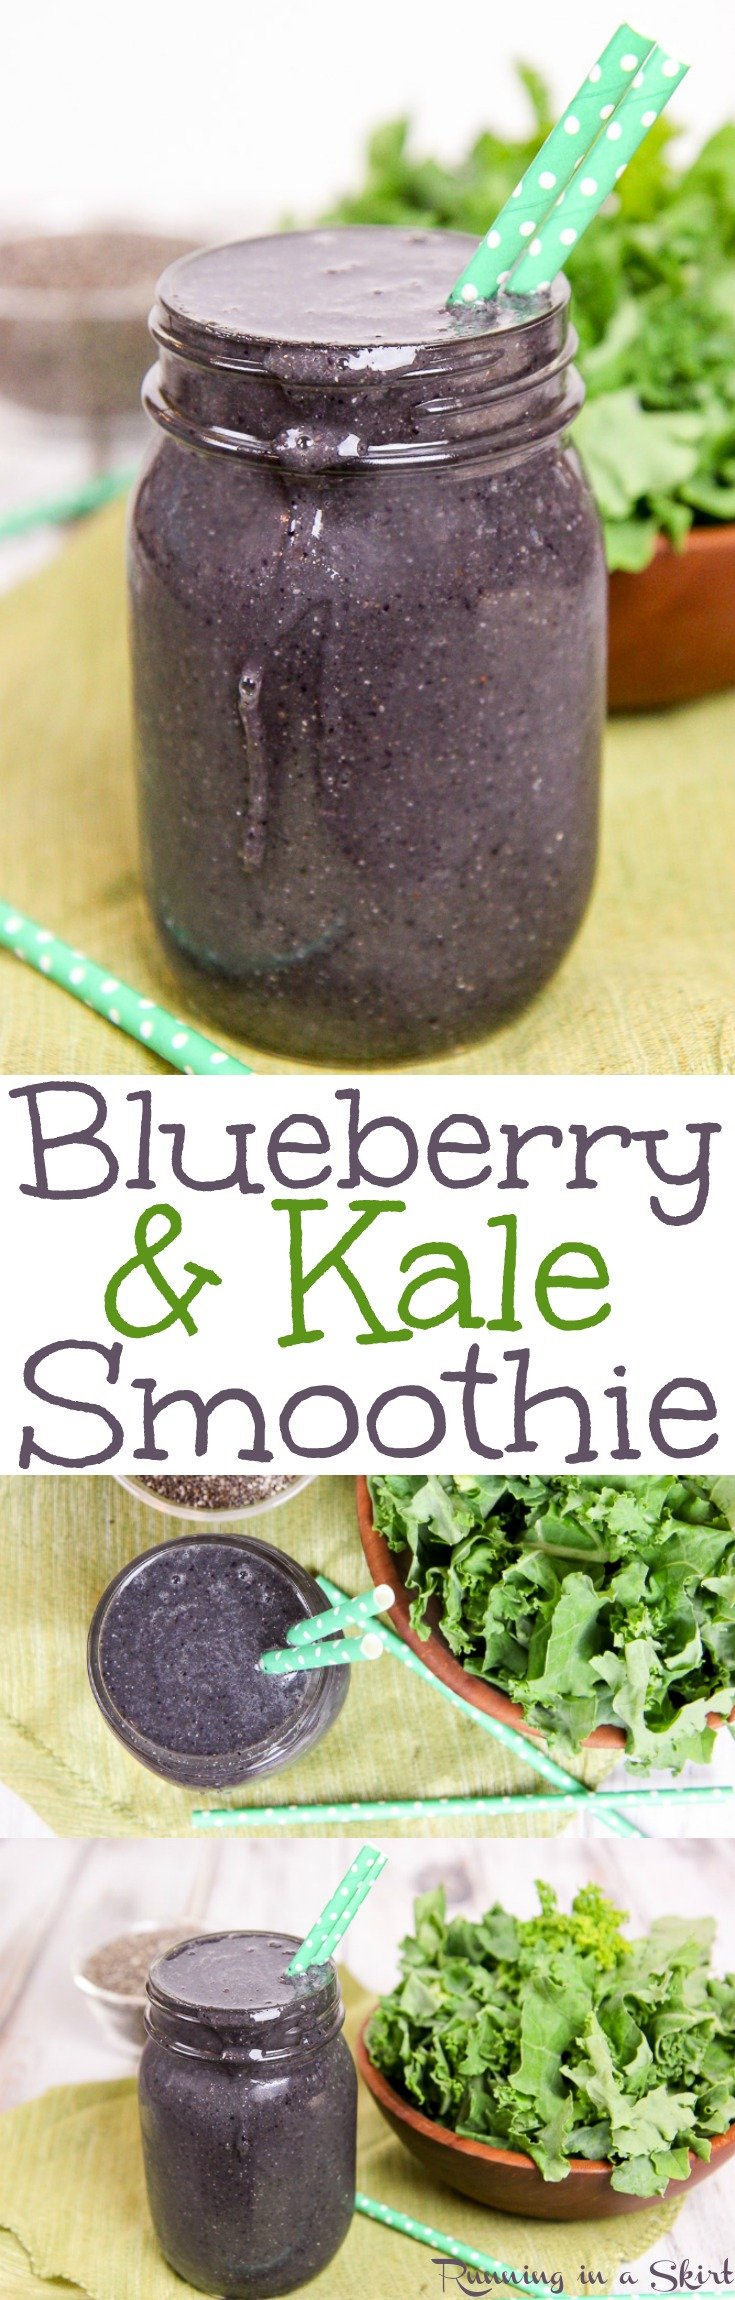 Kale and Blueberry Smoothie recipe. A sweet green smoothie with chia seeds and greens. Includes a frozen banana to make it creamy. Perfect for breakfast or a snack. Healthy, fast, vegan, gluten free and clean eating! / Running in a Skirt via @juliewunder